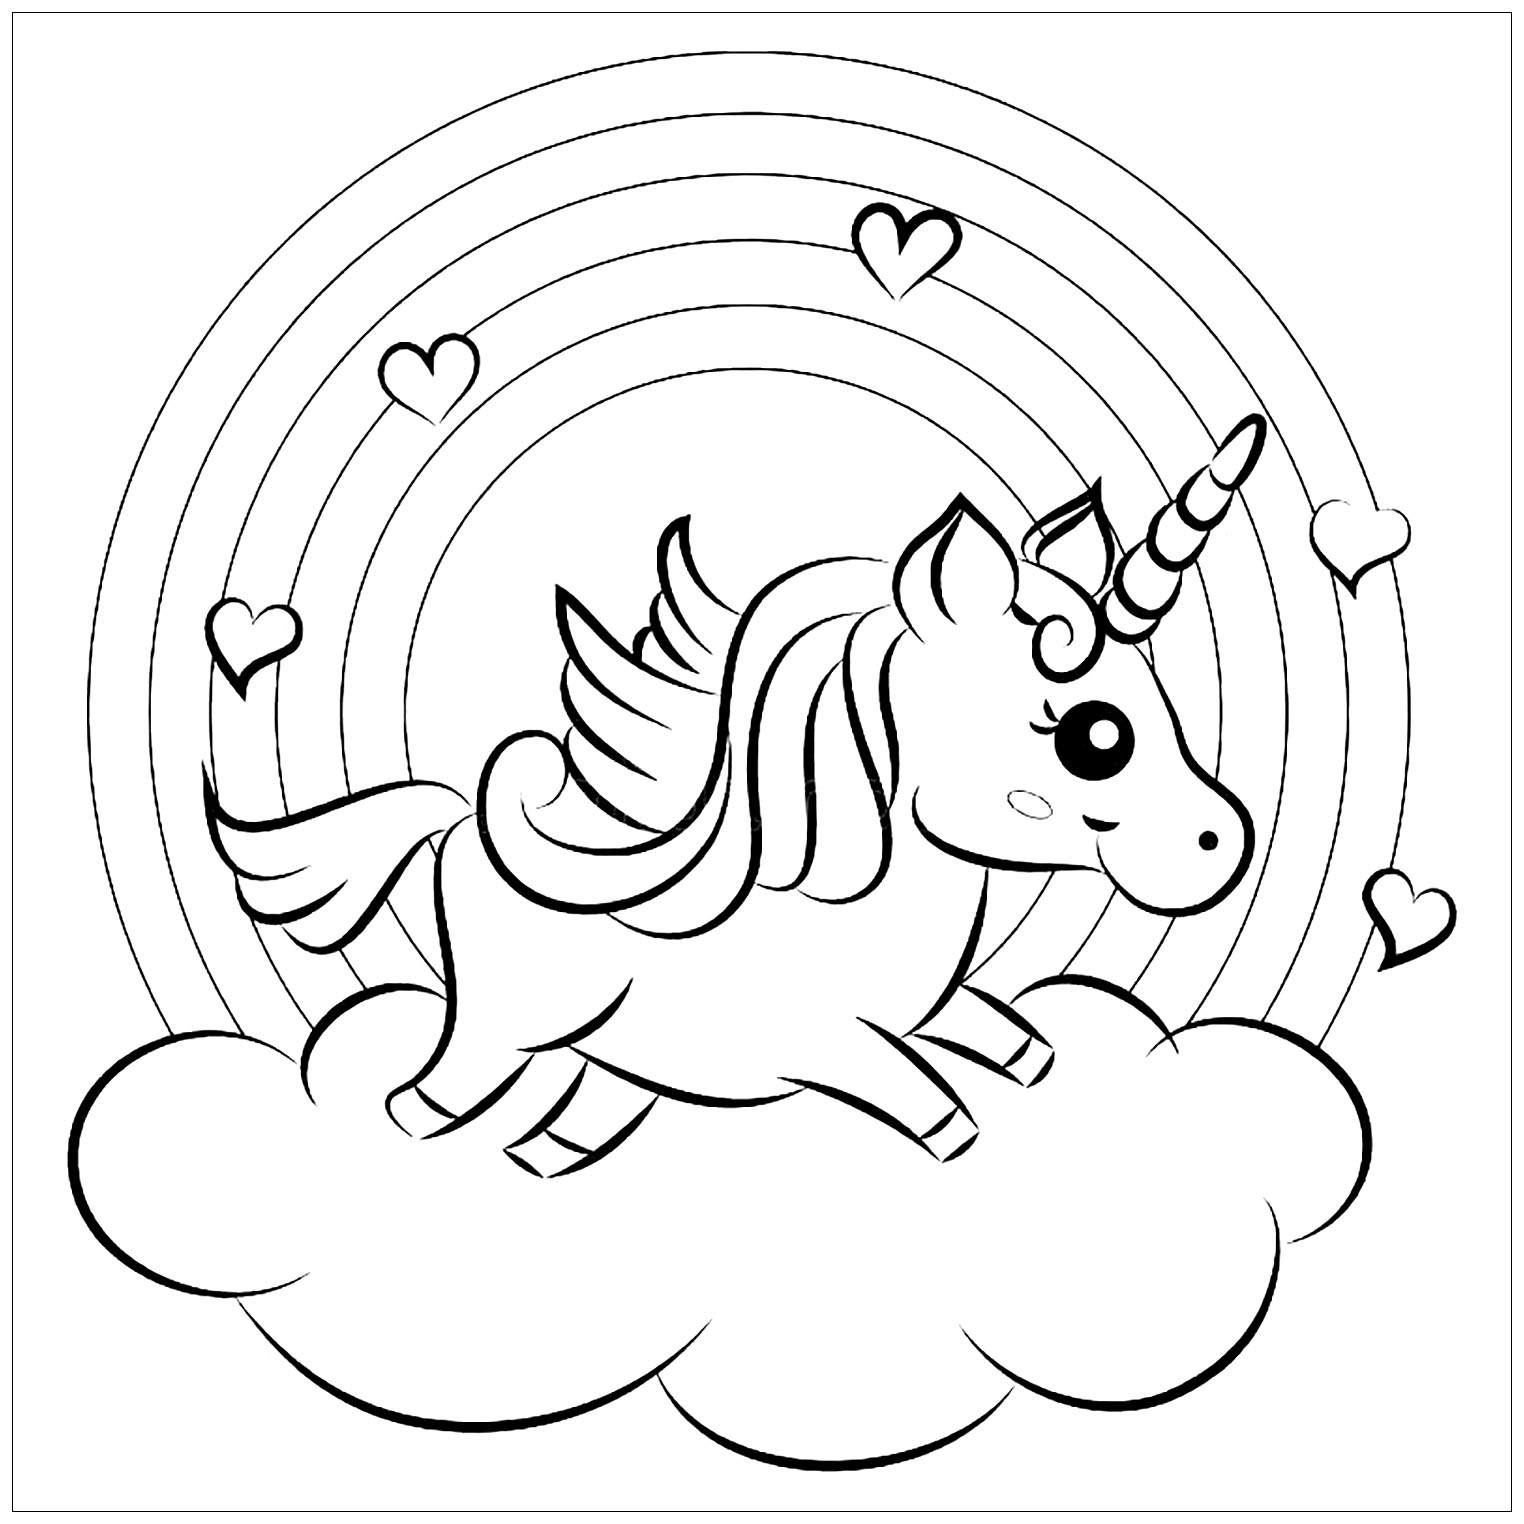 unicorn-coloring-pages-for-kids-unicorns-kids-coloring-pages